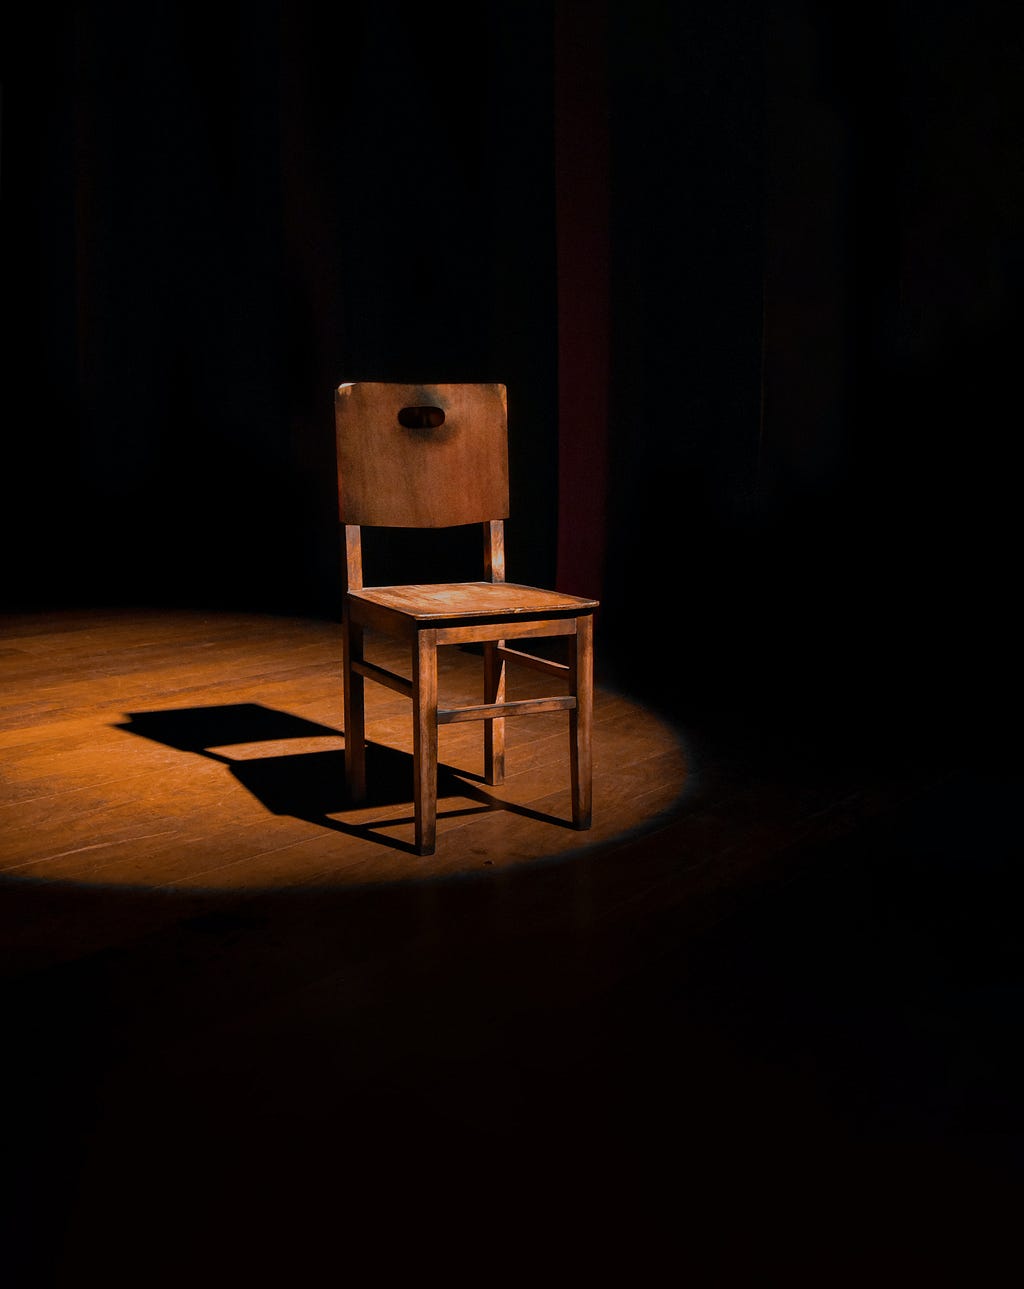 A small wooden chair in the centre of a dark room, with a spotlight cast from above.